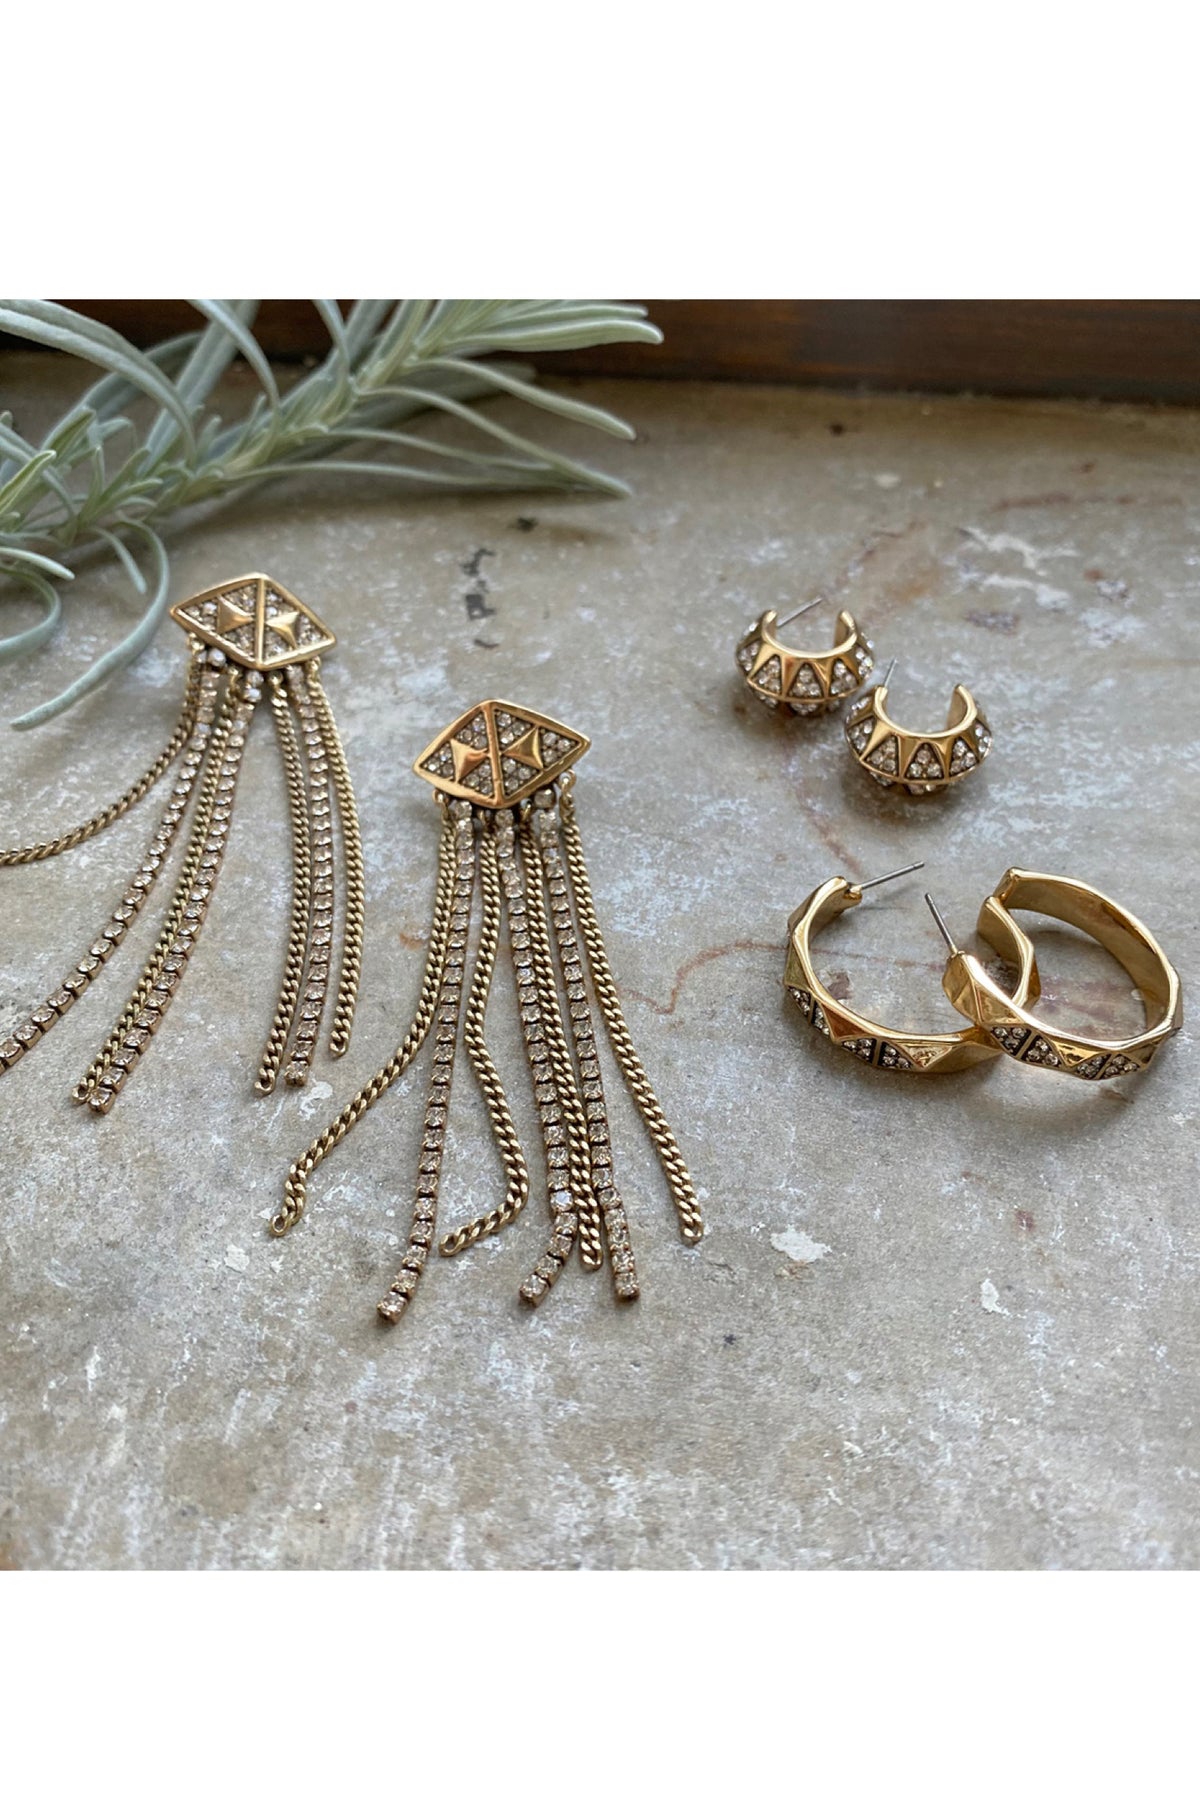 Shine Bright Long Statement Earrings Gold